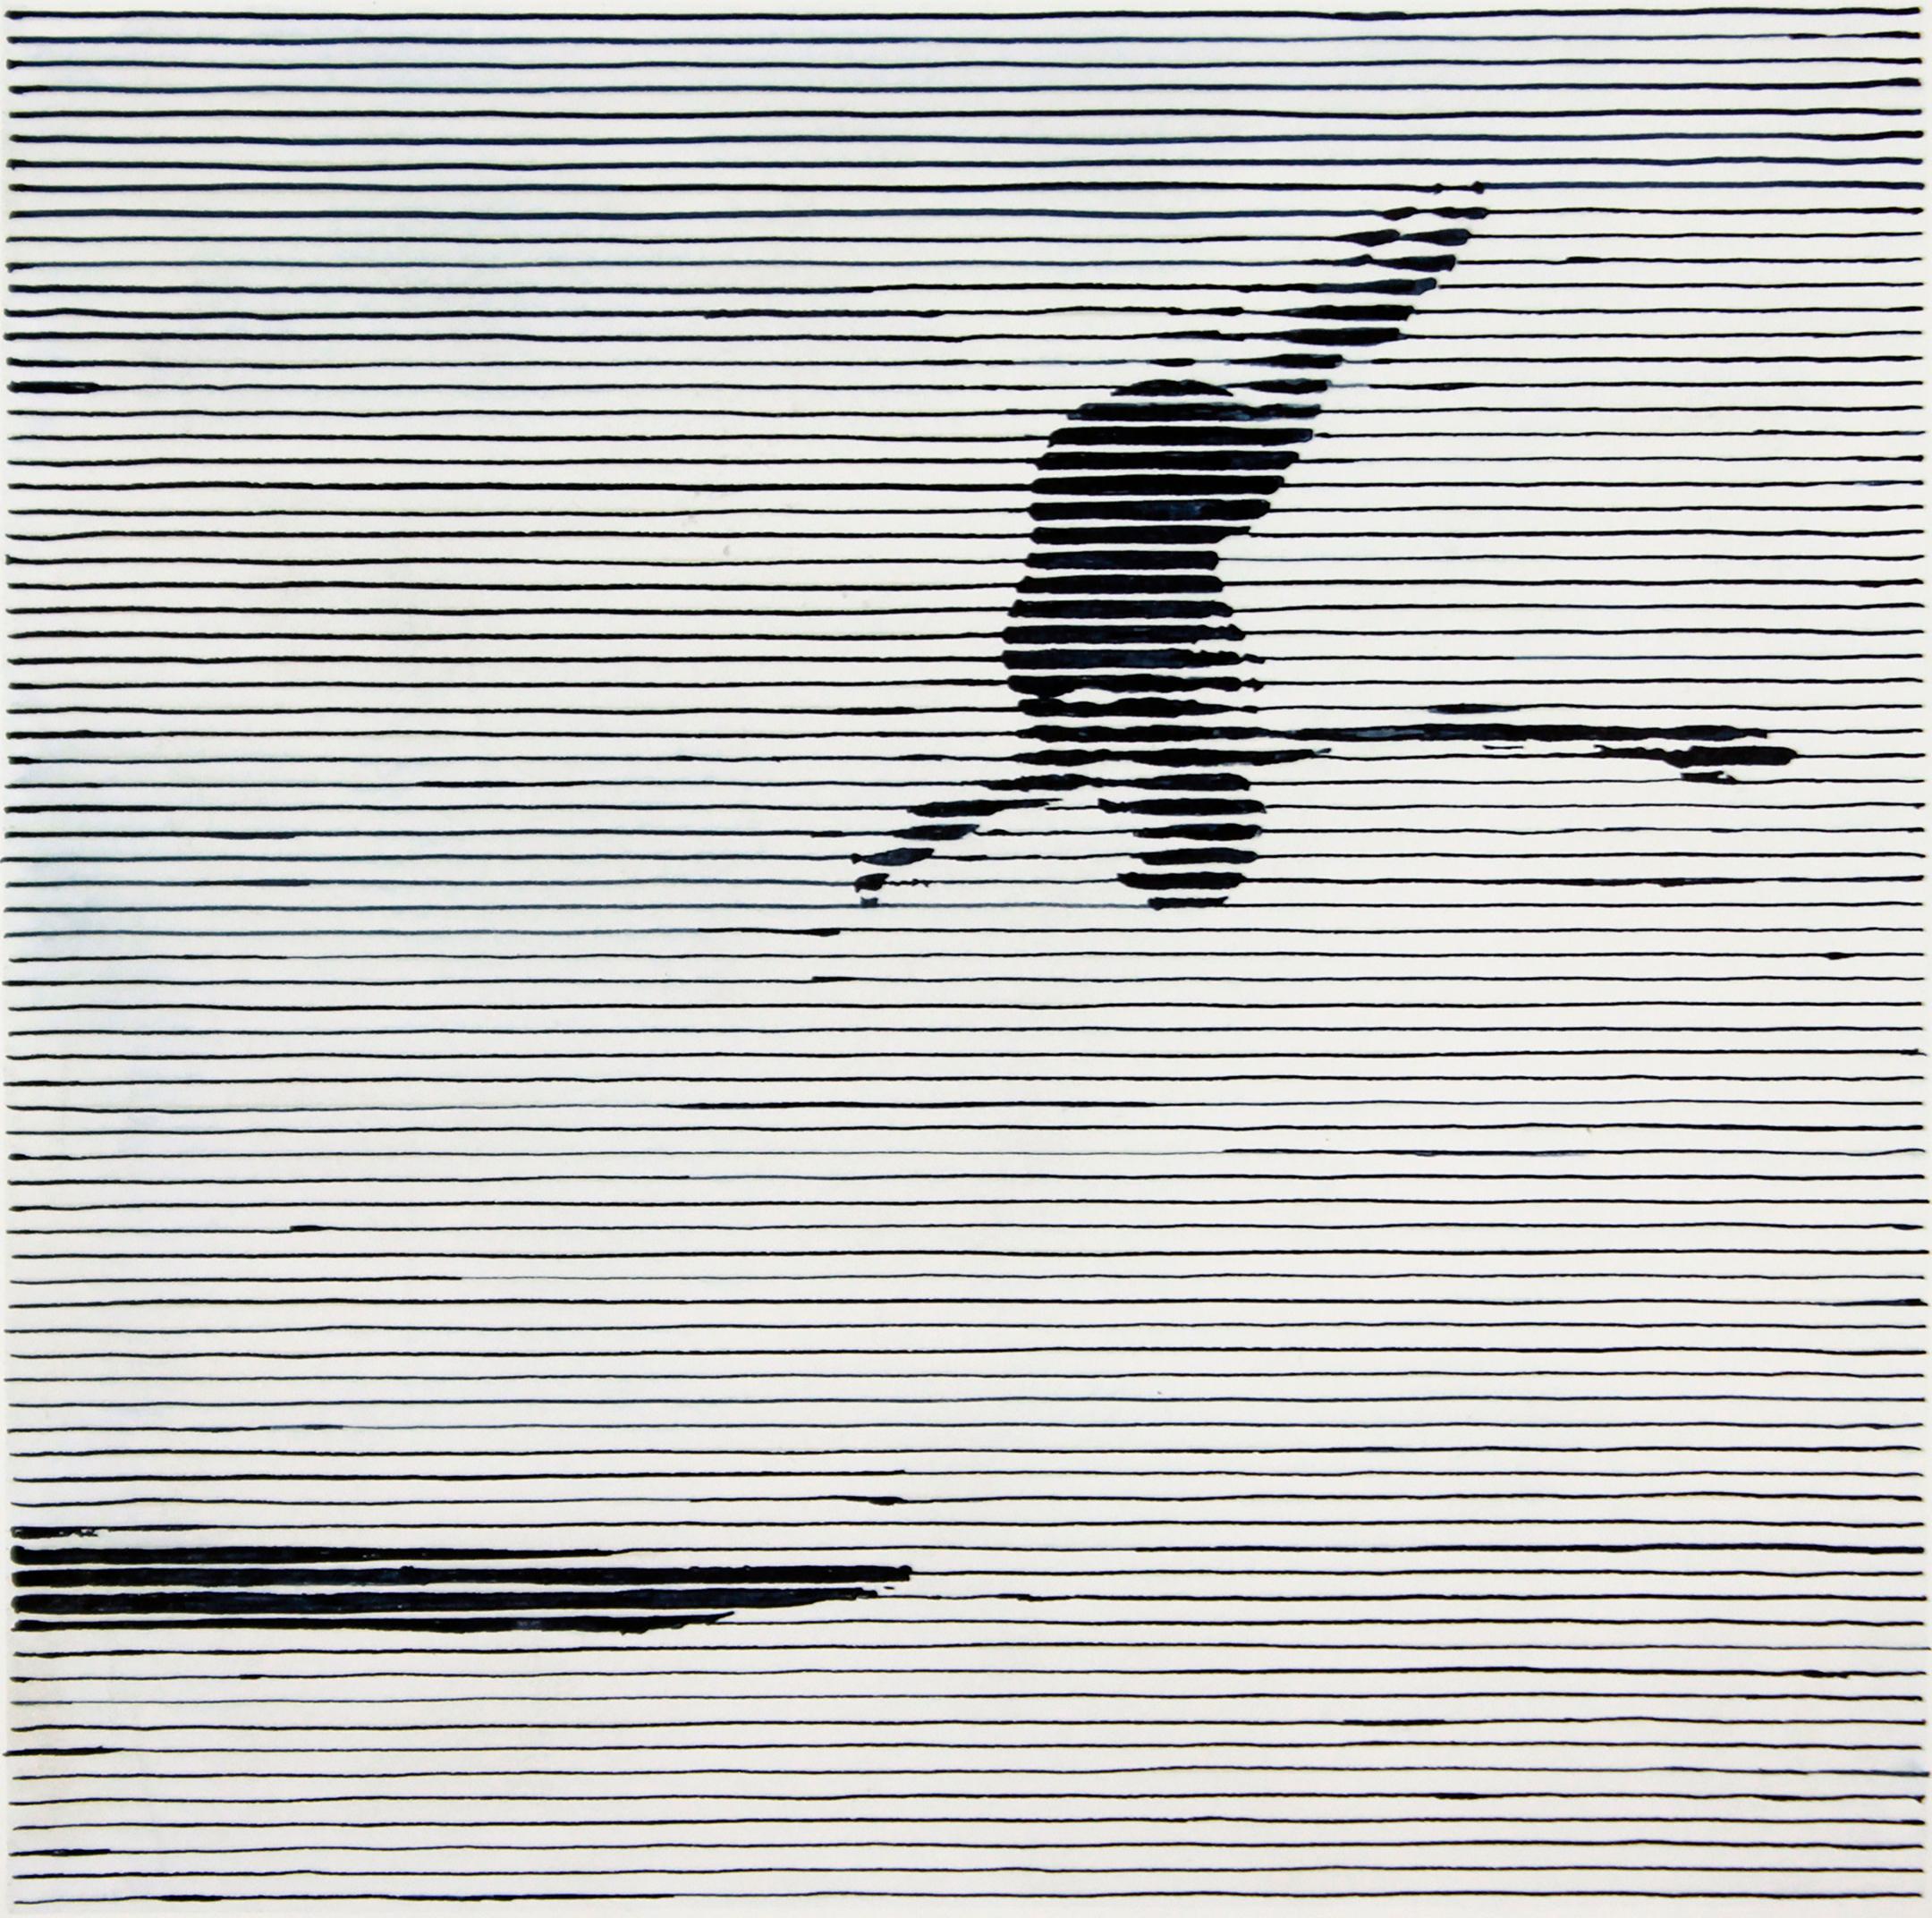 Charles Buckley Portrait - High Diver, black and white work on paper, woman diving into pool, stripes